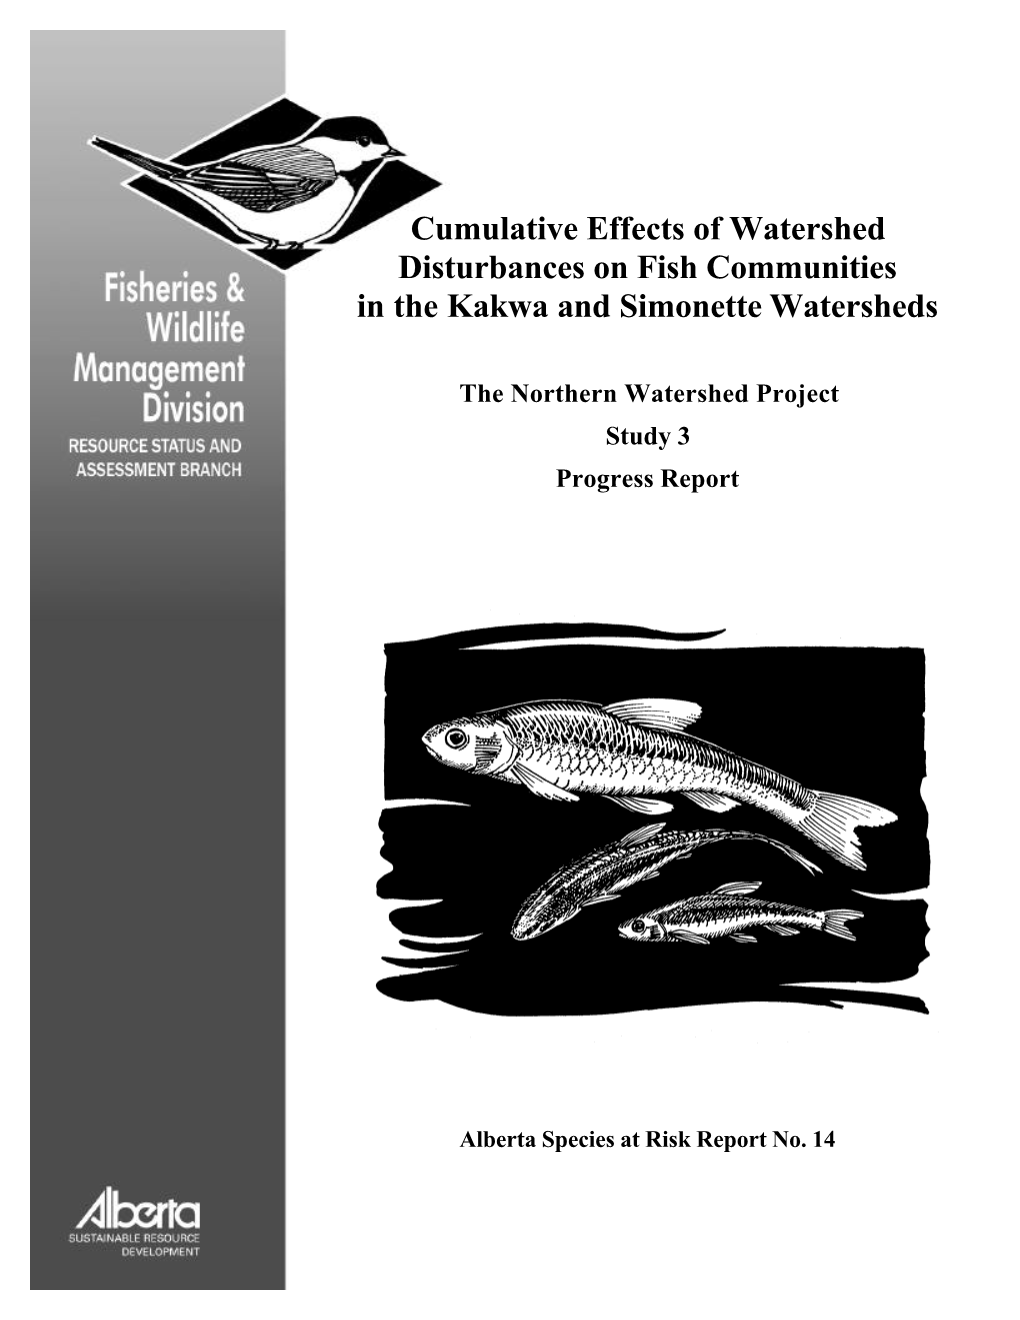 Cumulative Effects of Watershed Disturbances on Fish Communities in the Kakwa and Simonette Watersheds